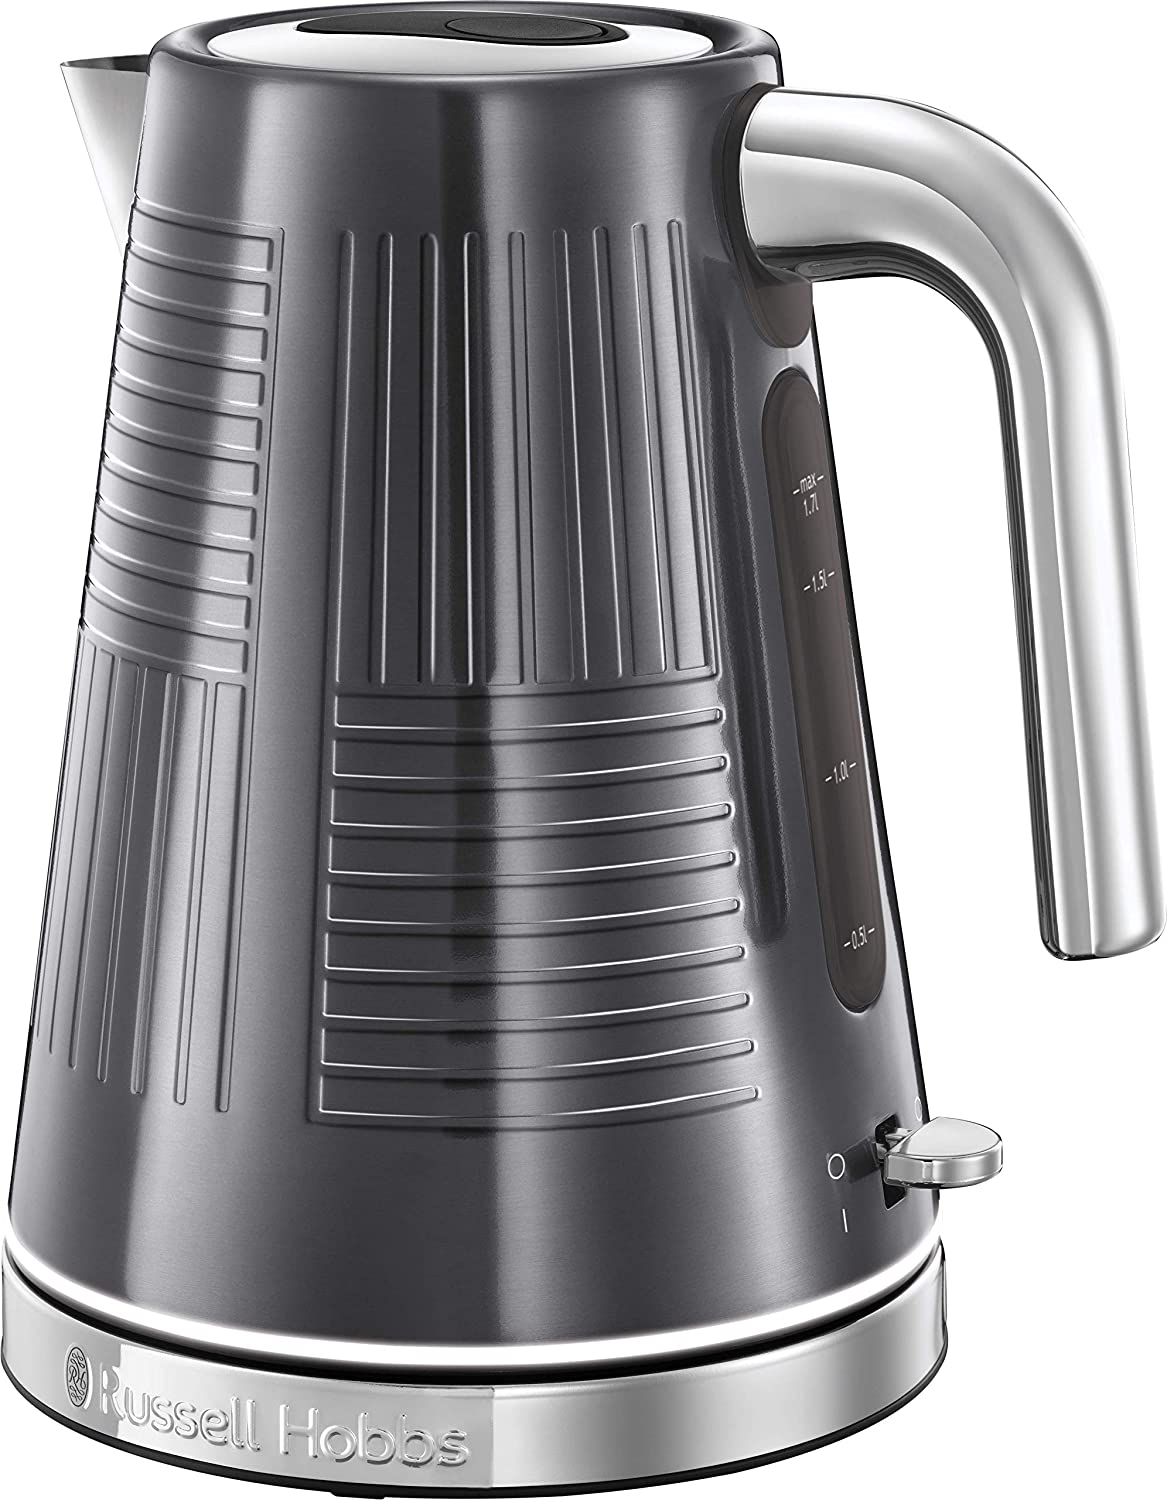 Russell Hobbs Geo Grey Stainless Steel Kettle, 1.7 L, 2400 W, Quick Boil Function, Optimised Spout, Removable Limescale Filter, Removable Lid, Water Level Indicator, Tea Maker 25240-70